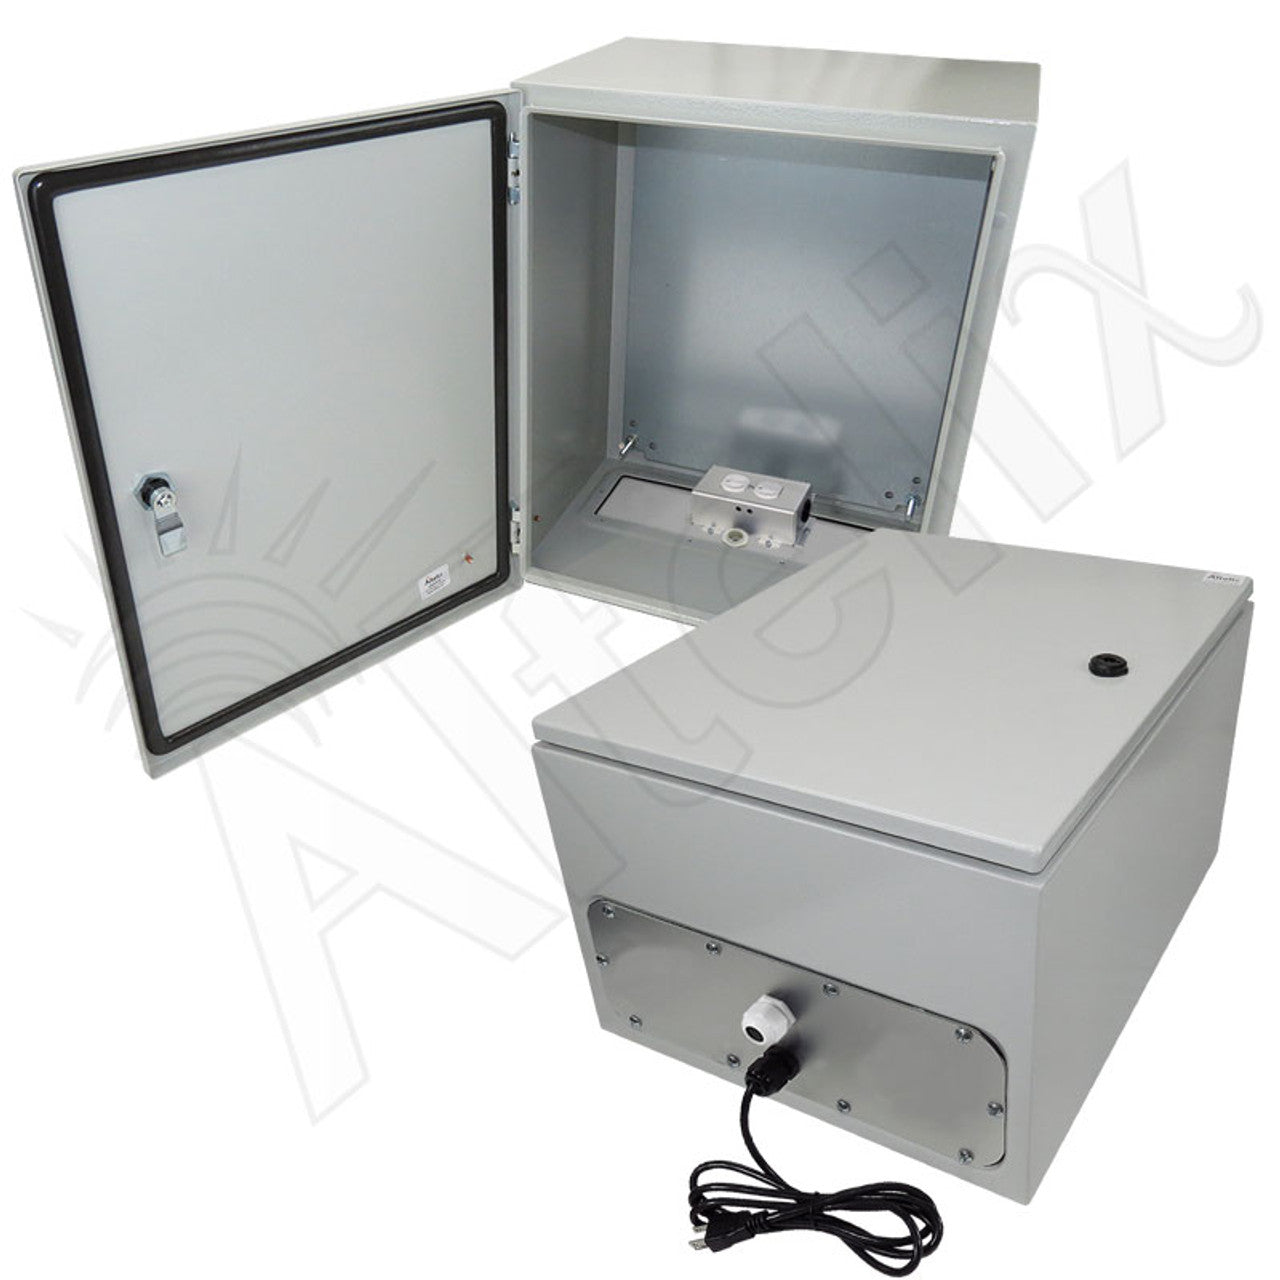 Altelix NEMA 4X Steel Weatherproof Enclosure with 120 VAC Outlets and Power Cord-3